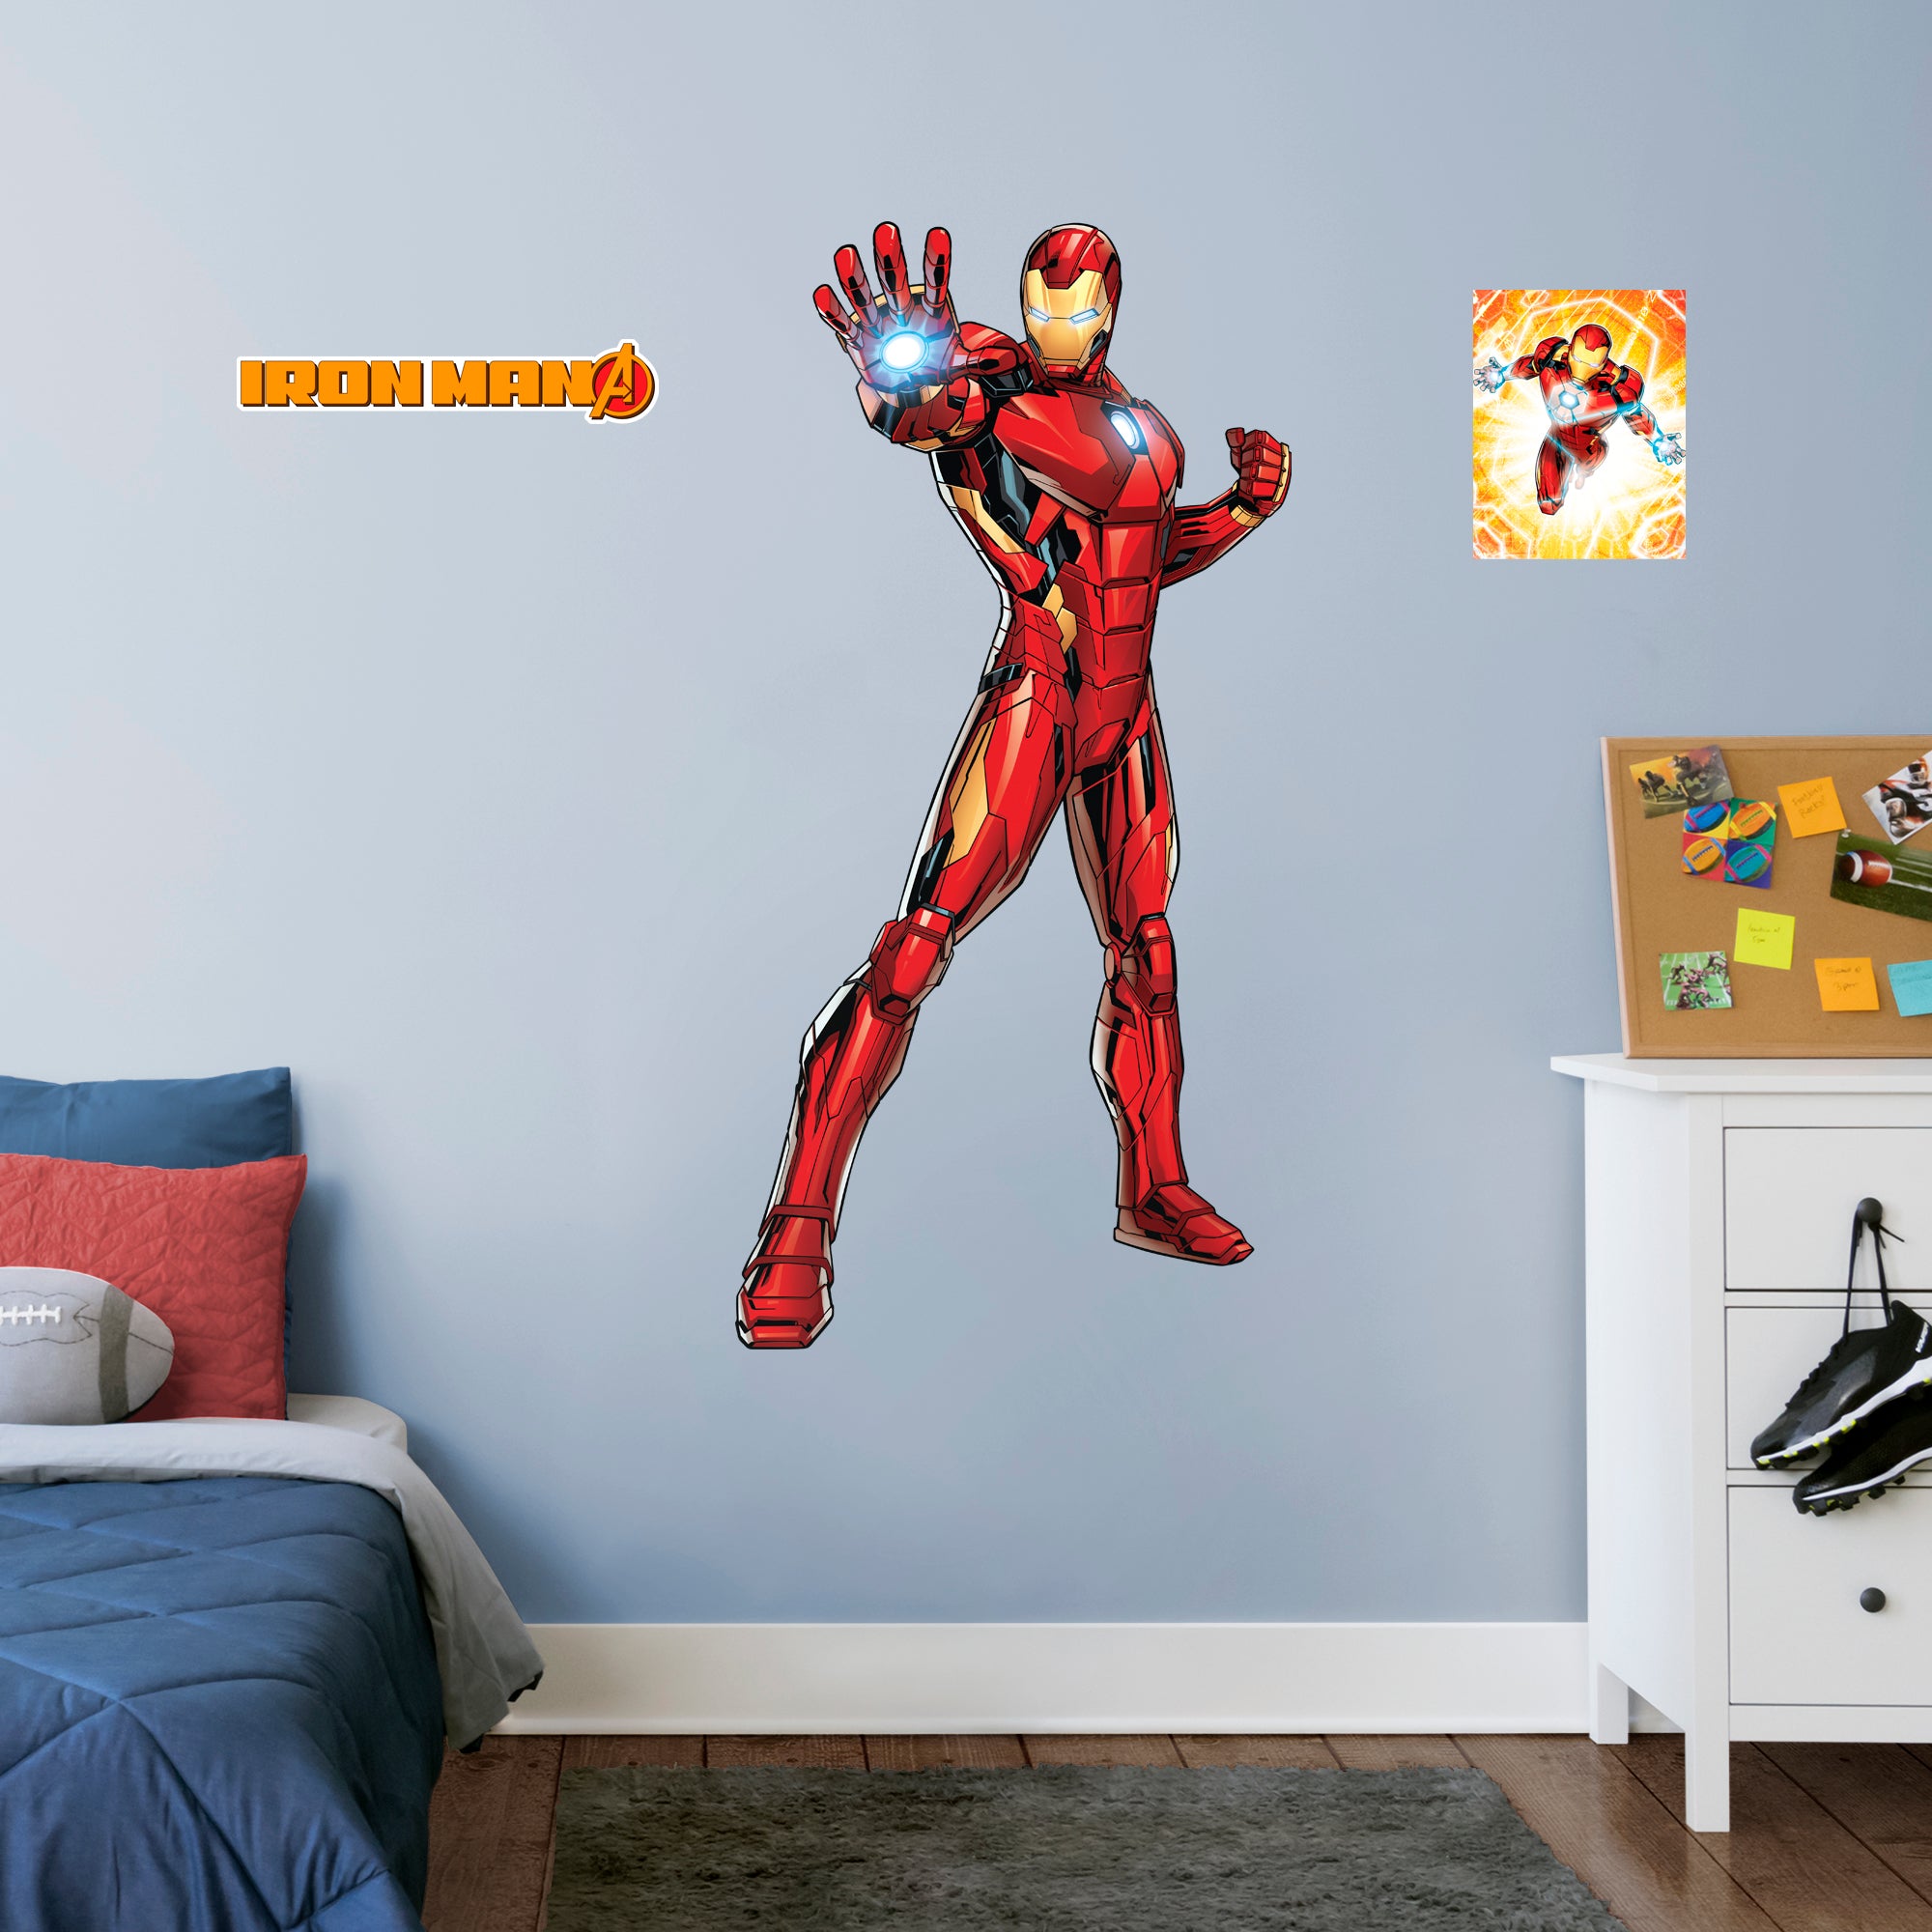 Iron Man: Avengers Core - Officially Licensed Removable Wall Giant Character + 2 Decals (25"W x 51"H) by Fathead | Vinyl